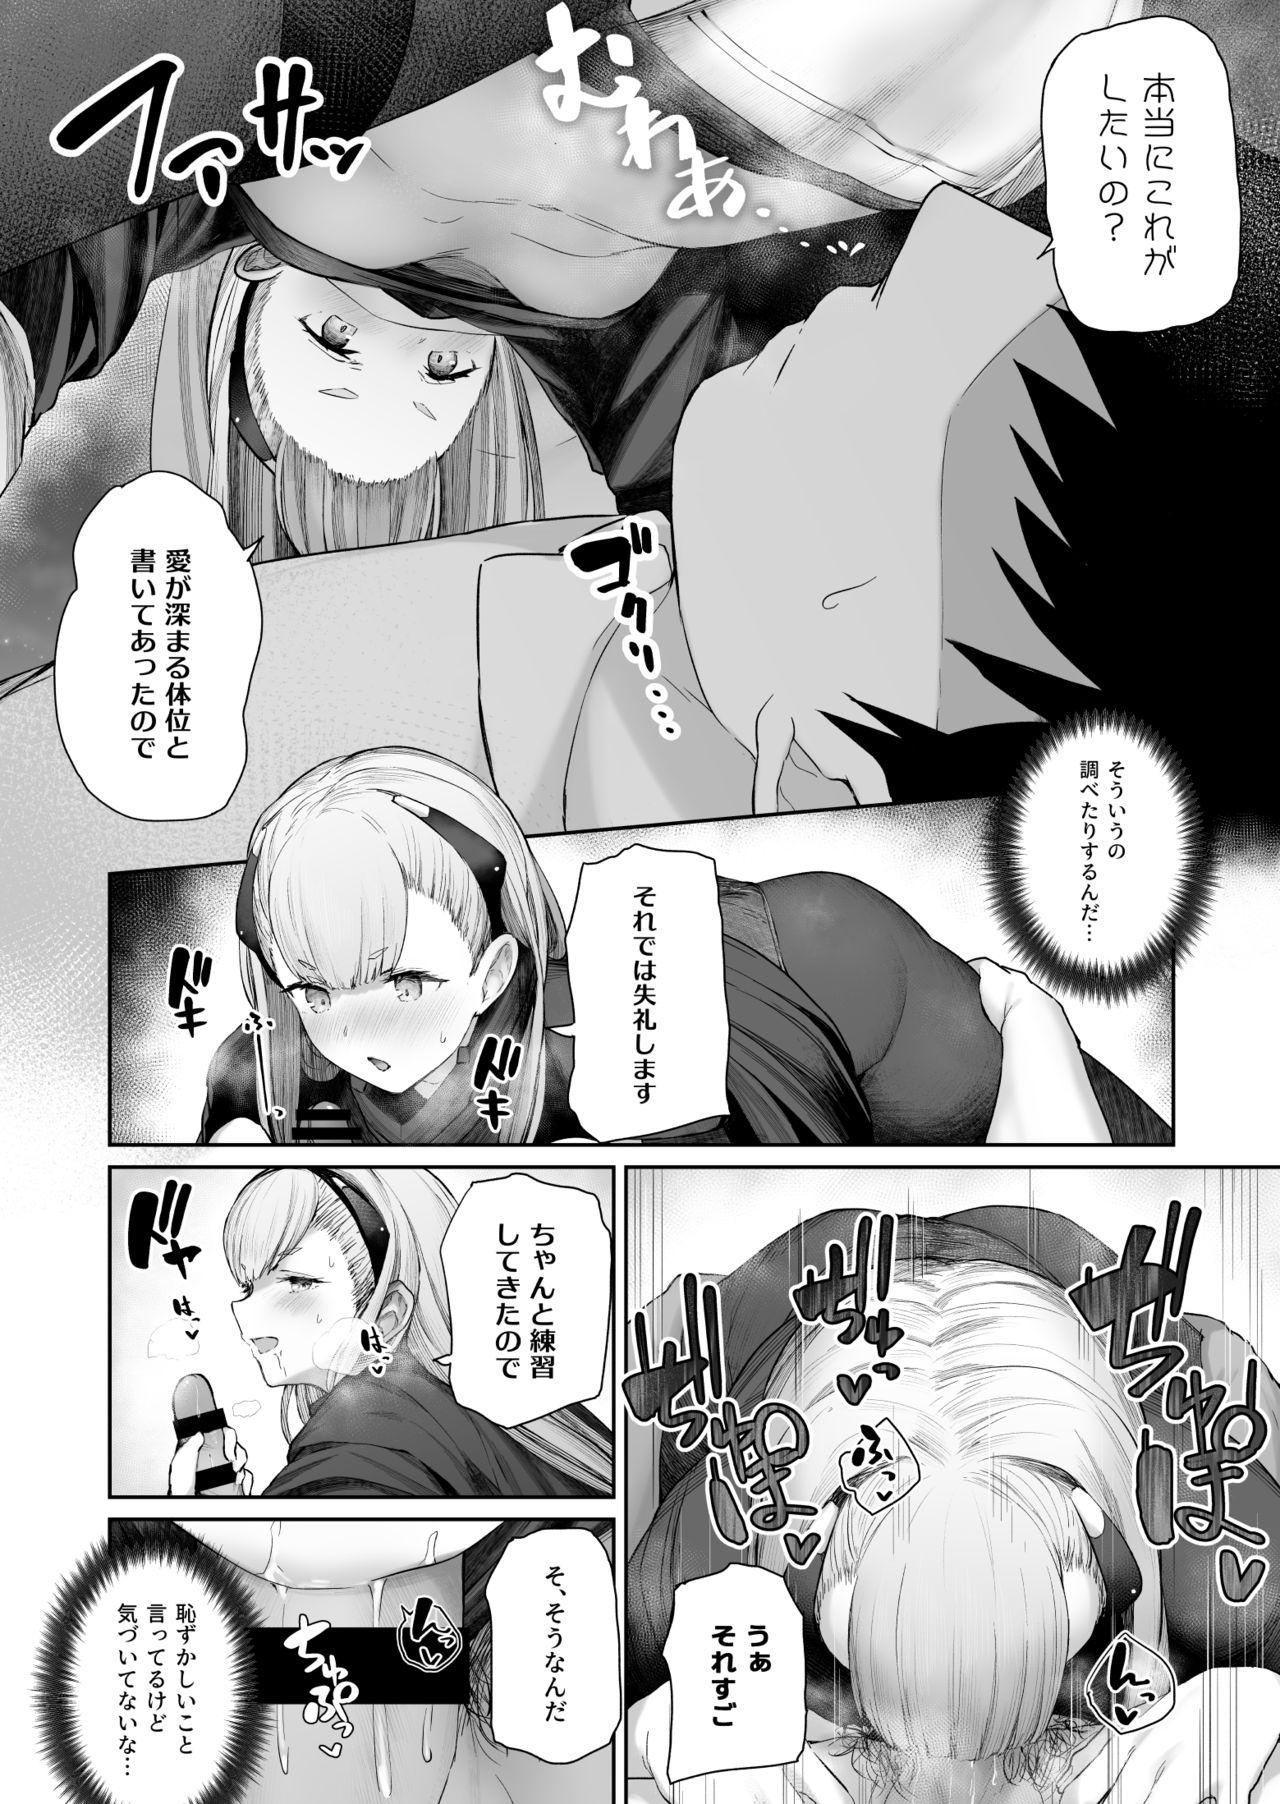 Banho AK-Alfa - Girls frontline Tight Cunt - Page 6